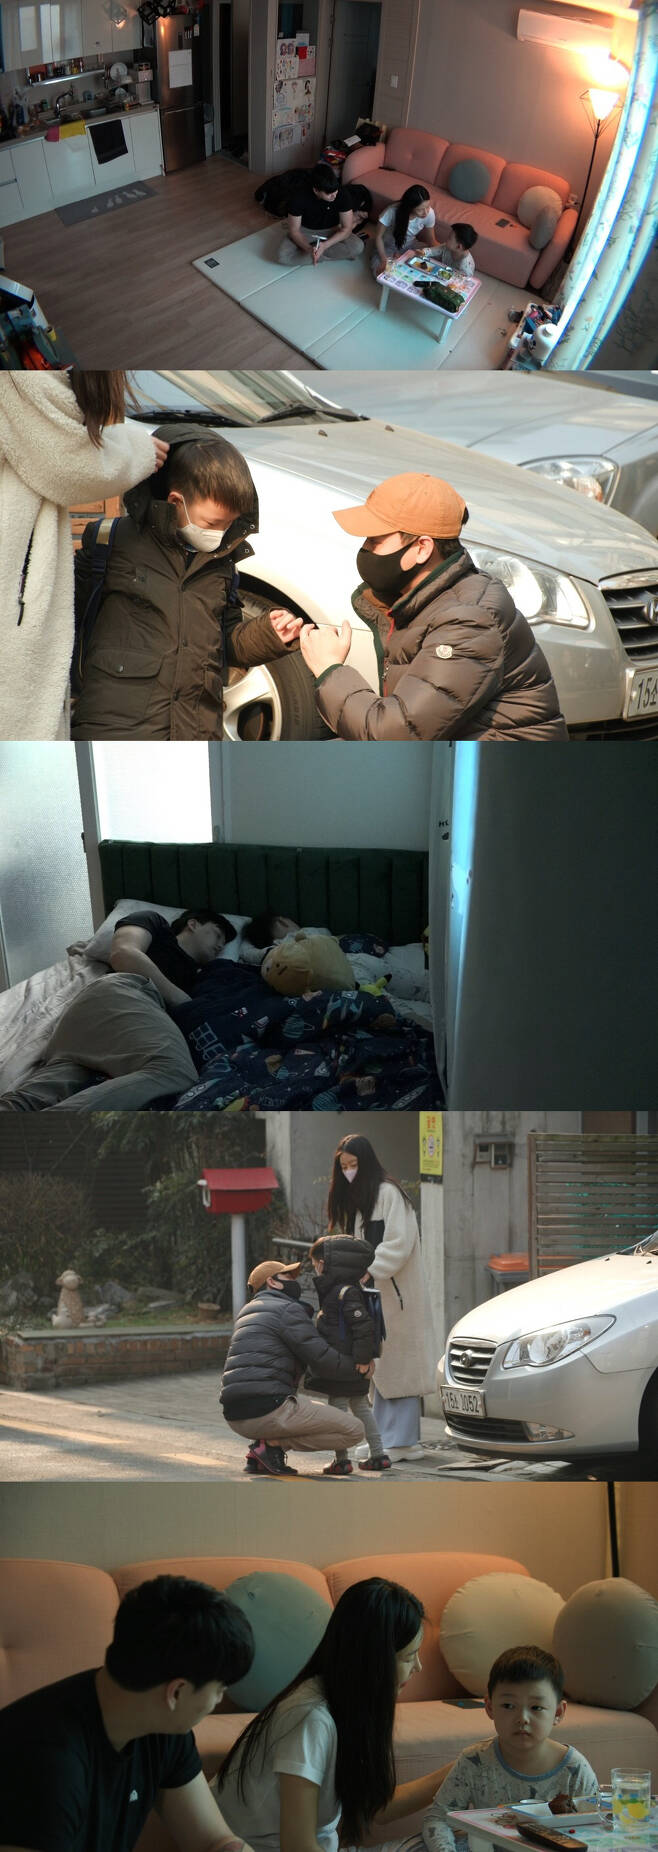 We did divorce 2 Eli and Ji Yeon-soo again poured out a bitter bitterness toward each other.TV CHOSUN Real Time drama We Divorce 2 (Udivorce 2) is a real time drama that deals with the divorce after marriage that has not been seen before, suggesting the possibility of a new relationship that can be a good friend relationship, not a purpose of reunion.Nahan Il - Yu Hye Young, Eli - Ji Yeon-soos honest and bold reunion scene gathered topics and showed the power to take the top spot in the same time zone for three consecutive weeks.According to Smart Media Rep (SMR), which distributes video on demand (VOD) of major broadcasters online, the number of online playbacks of Woundice2 has reached 10 million views, and it is showing a wide range of views that have both audience rating and topicality.In this regard, Eli, Ji Yeon-soo and son Minsu are drawing attention in the 4th episode of Udivorce 2 which is broadcasted at 10 pm on the 29th (tonight).First, Eli and Ji Yeon-soo moved their hearts and spent the night in the desperate wind of their son Minsu, Dad, sleep only one night.When he left Minsu alone in the living room after putting him in bed, Eli asked Ji Yeon-soo, Can I shower? and suddenly asked him, embarrassing Ji Yeon-soo.As the atmosphere has become suddenly awkward, Ji Yeon-soo is wondering how he would have reacted.The next morning, Eli and Ji Yeon-soo started to talk about the inside story that they could not bring out in front of their son Minsu after he had Minsu.Ji Yeon-soo said: I was alone in United States of America.There was no husband and only Eli as a son, she said, pouring out her upsets in the United States of America life, and Eli said, I was always next to you.It was your anger, he said, raising anxiety again.Ji Yeon-soo said,  (My mother-in-law) told me to live in three deaf years, three dumb years, and three blind years, he said. I said I should endure it. Eli said, My parents are not people to talk about it.In the end, Eli was exhausted from the ongoing argument and left the house.As the conflict between the two deepens, there is a growing tension that they will be able to find a consensus for resolution.The two men, who had fought a war, headed to a nearby cafe, and had deep conversations about Minsu and his future plans.At this time, Eli surprised everyone by asking Ji Yeon-soos intention, saying, What if I come to Korea and live?Ji Yeon-soo is paying attention to what kind of answer he would have given to Elis proposal, which he did not expect at all, and whether the two have the same idea about reunition.Eli and Ji Yeon-soo will be impressed by the dream of spending a night like two years with their son Minsu, the production team said. Please check on the 29th (today) whether the green light of reunion will eventually be turned on between two people who love Minsu more than anyone else.On the other hand, TV CHOSUN real time drama We Divorce 2 is broadcast every Friday night at 10 pm.